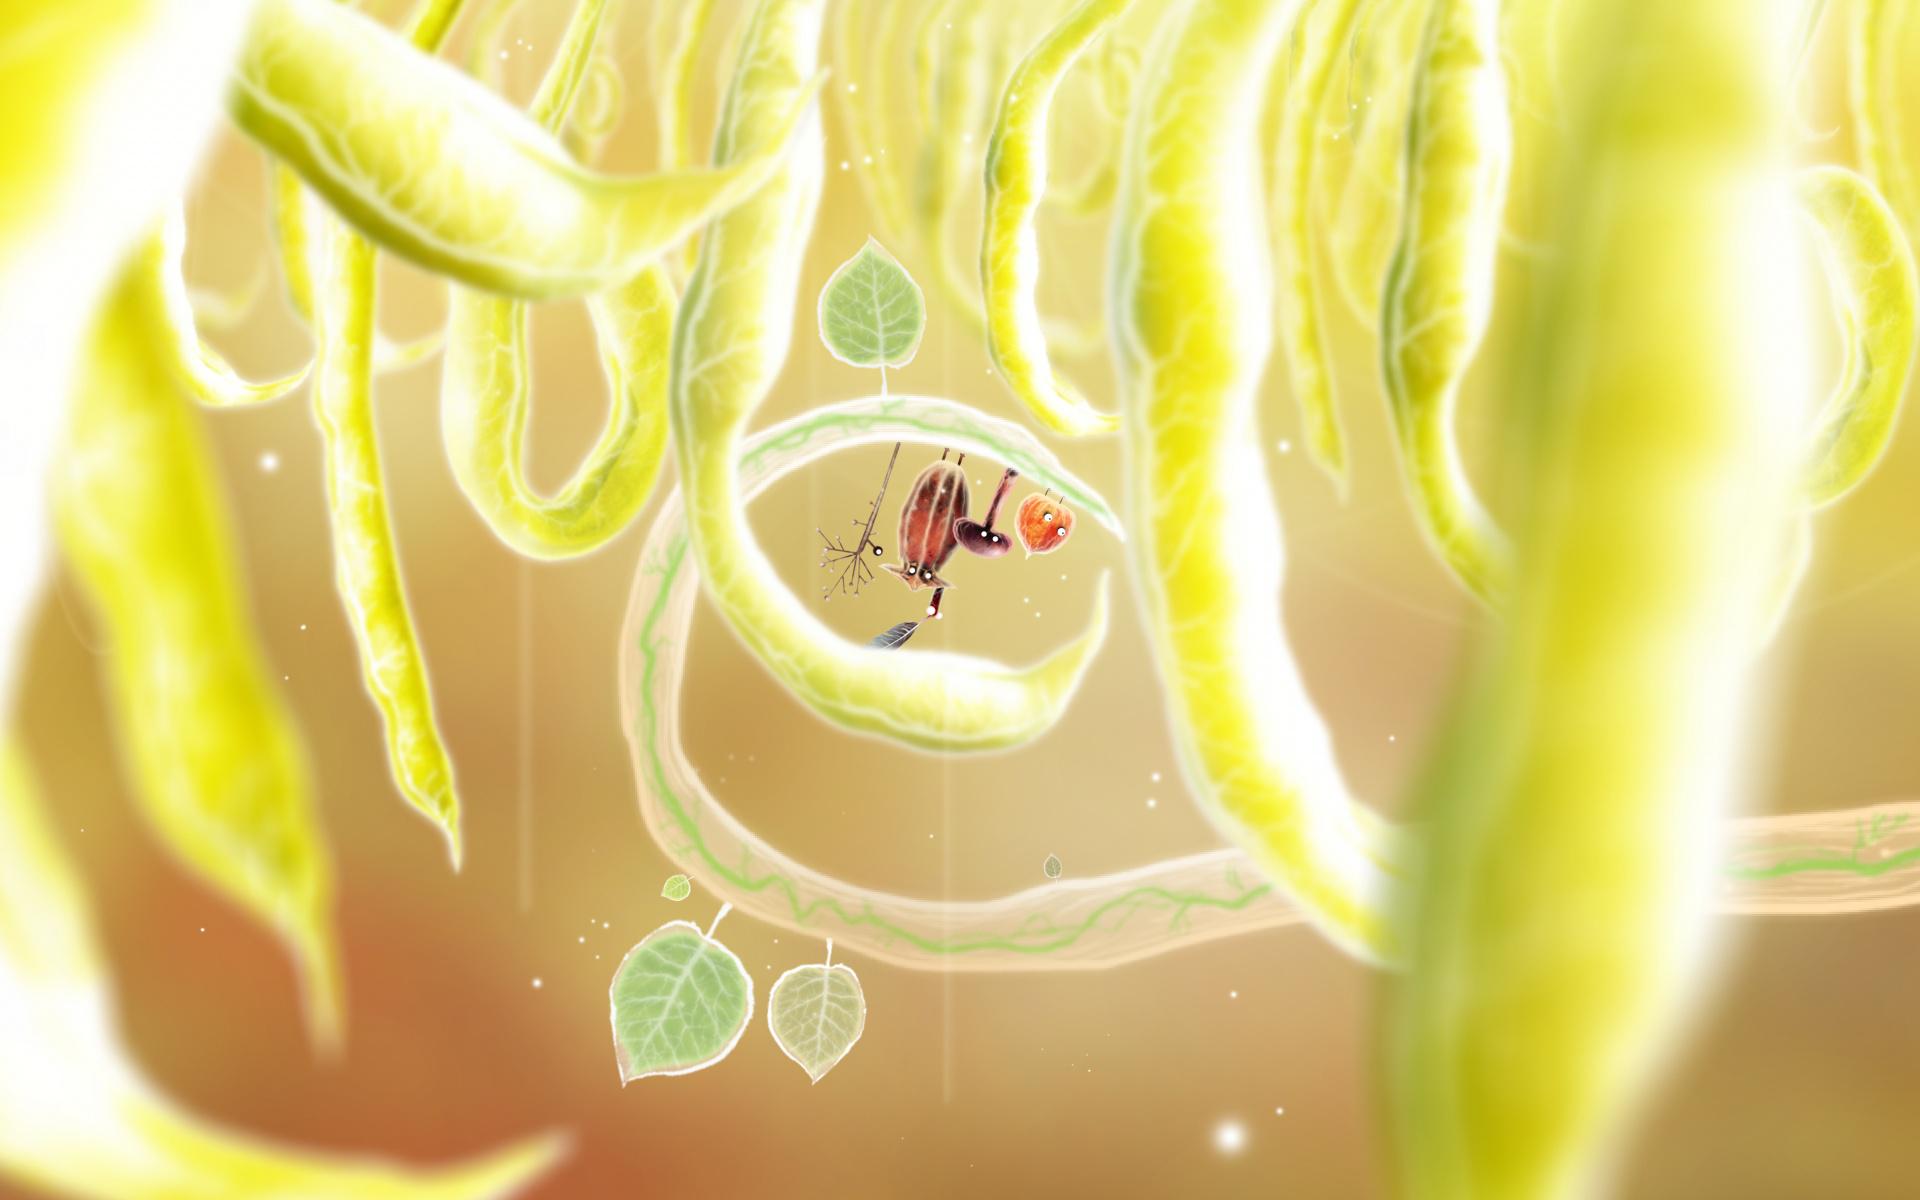 download botanicula ps4 for free